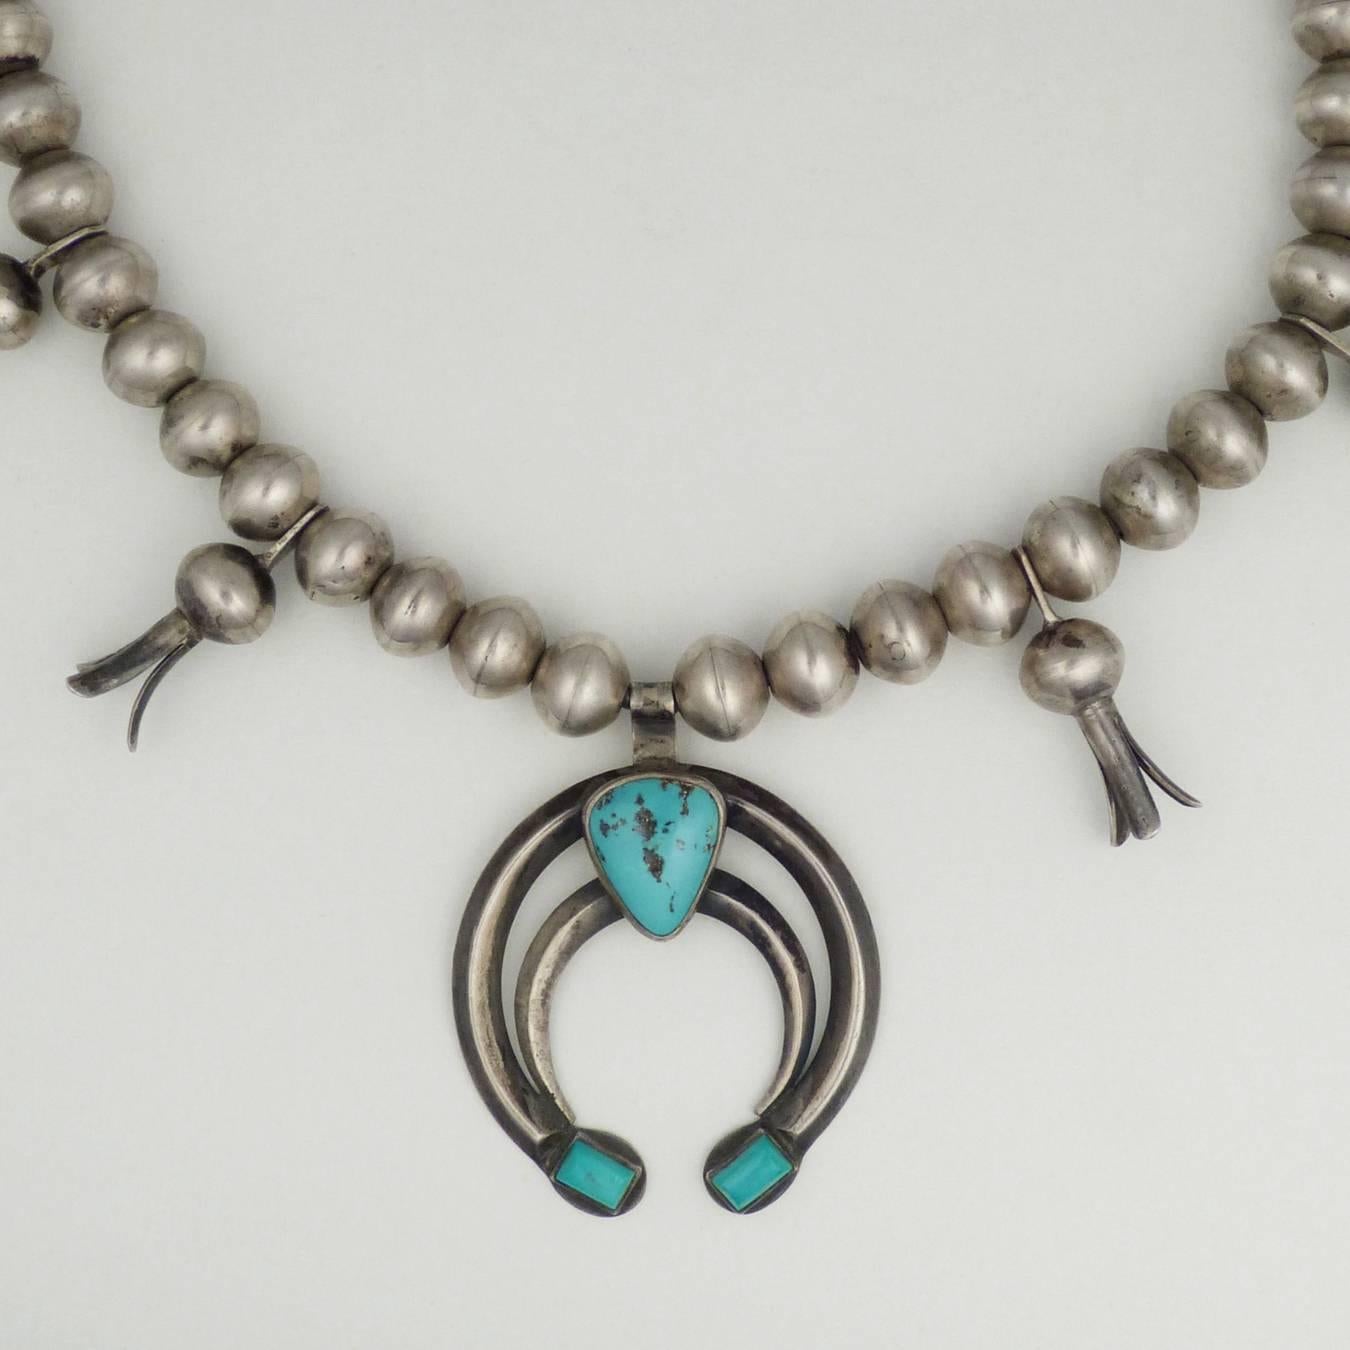 The squash blossom necklace is an iconic piece from the American southwest. This necklace is a perfect example, with its central naja adorned with three bezel set natural turquoise stones. Necklace measures 23